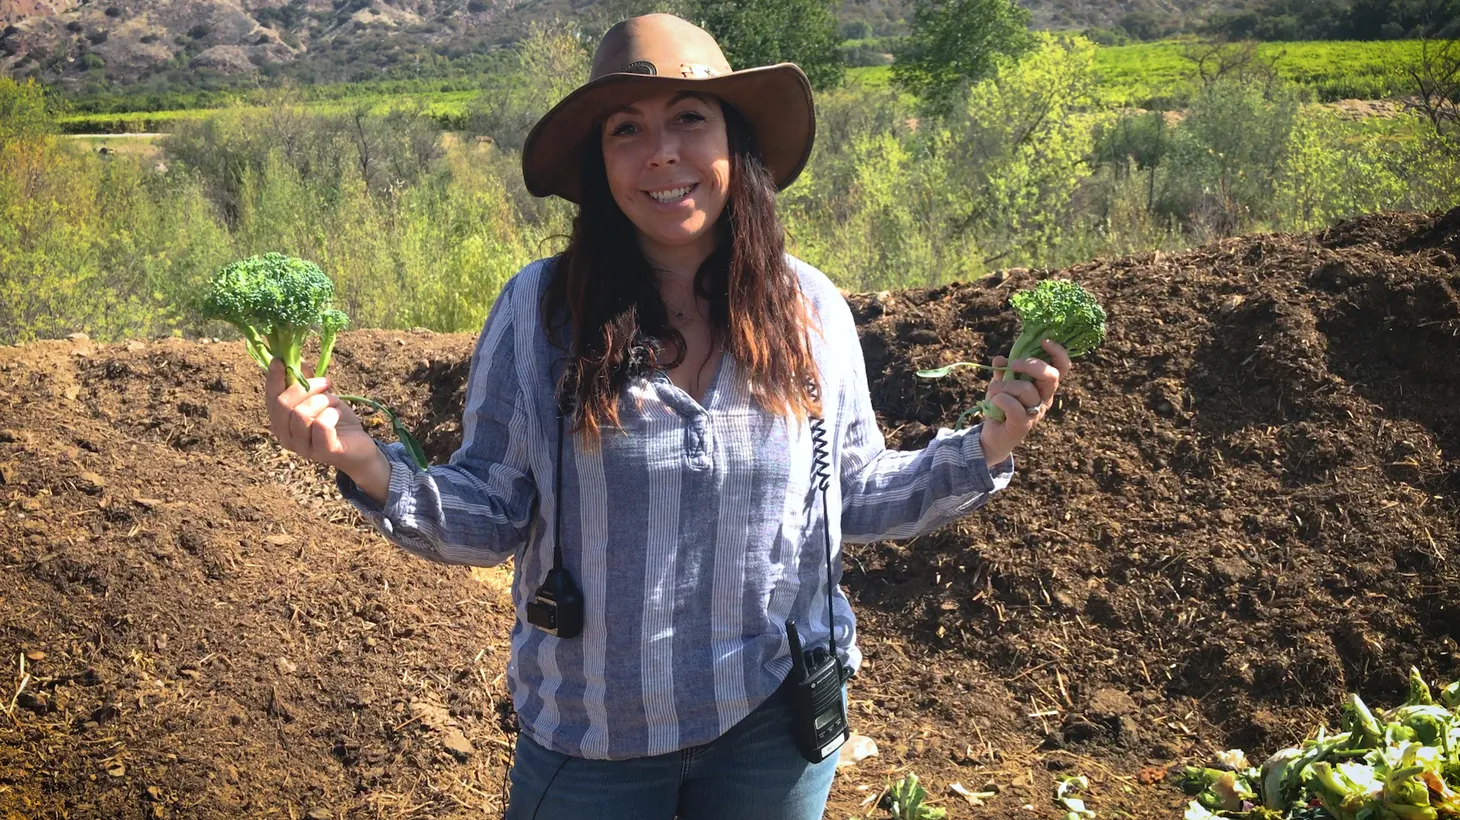 Mollie Englehardt started her farm four years ago to support her local vegan restaurant chain, Sage.